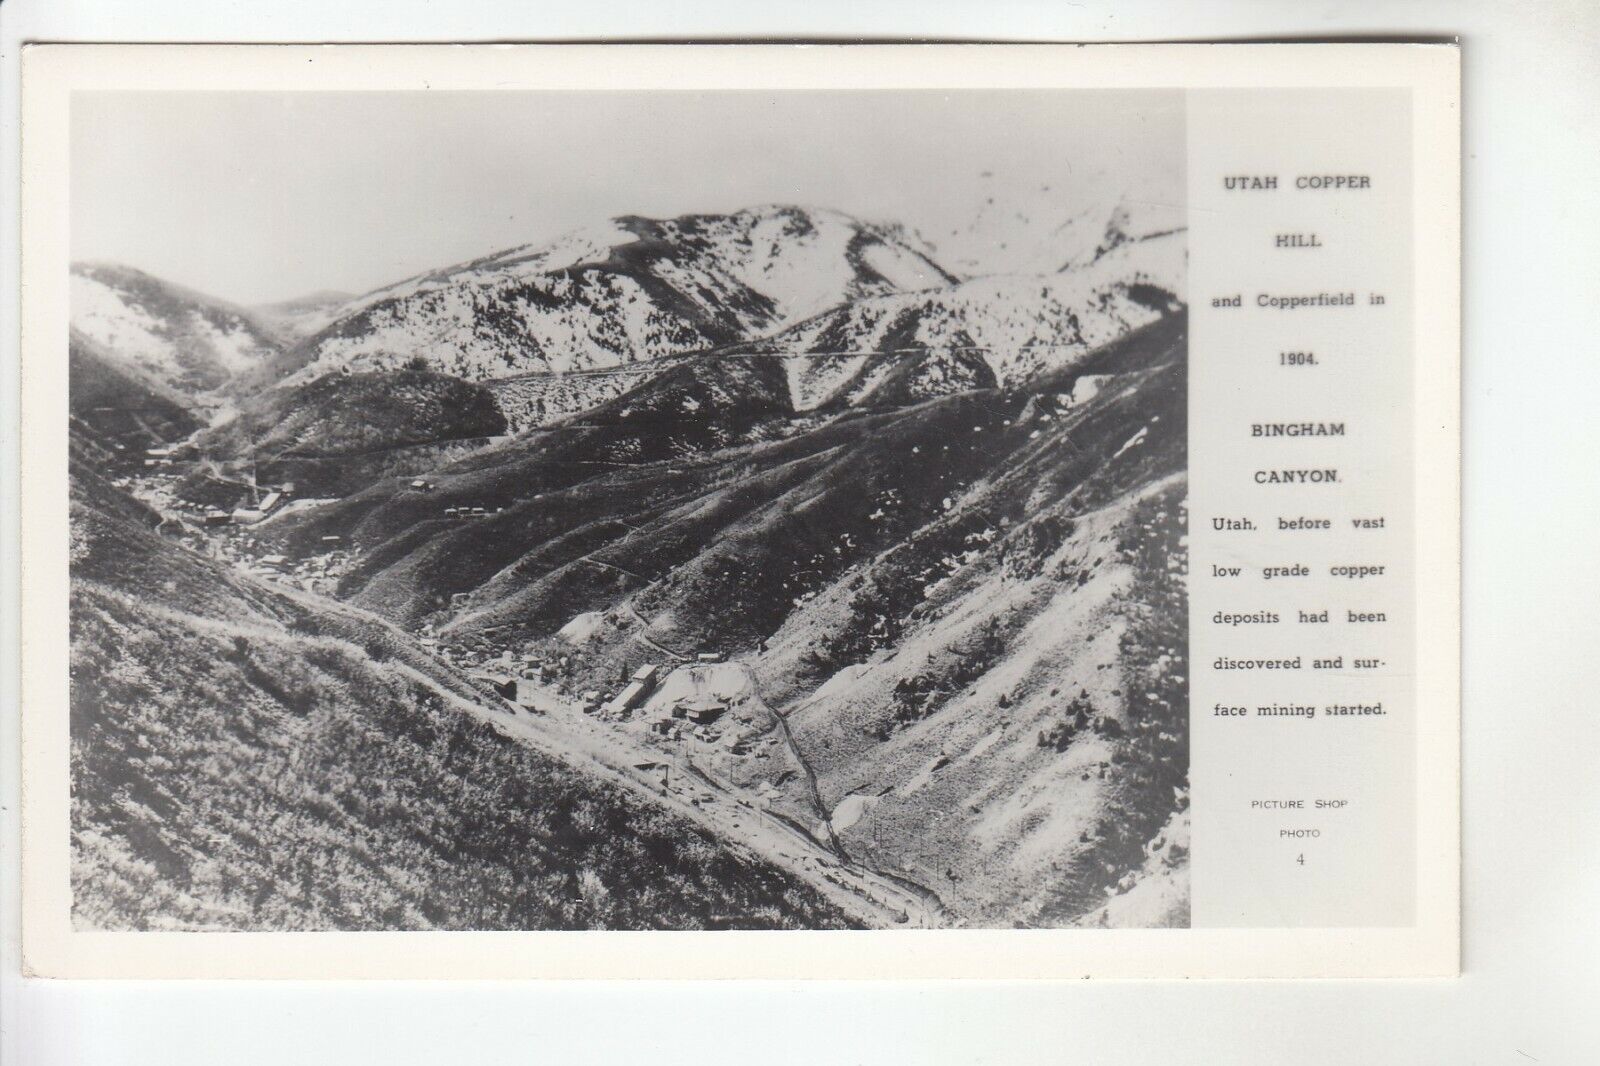 Real Photo Postcard Utah Copper Hill and Copperfield Bingham Canyon UT